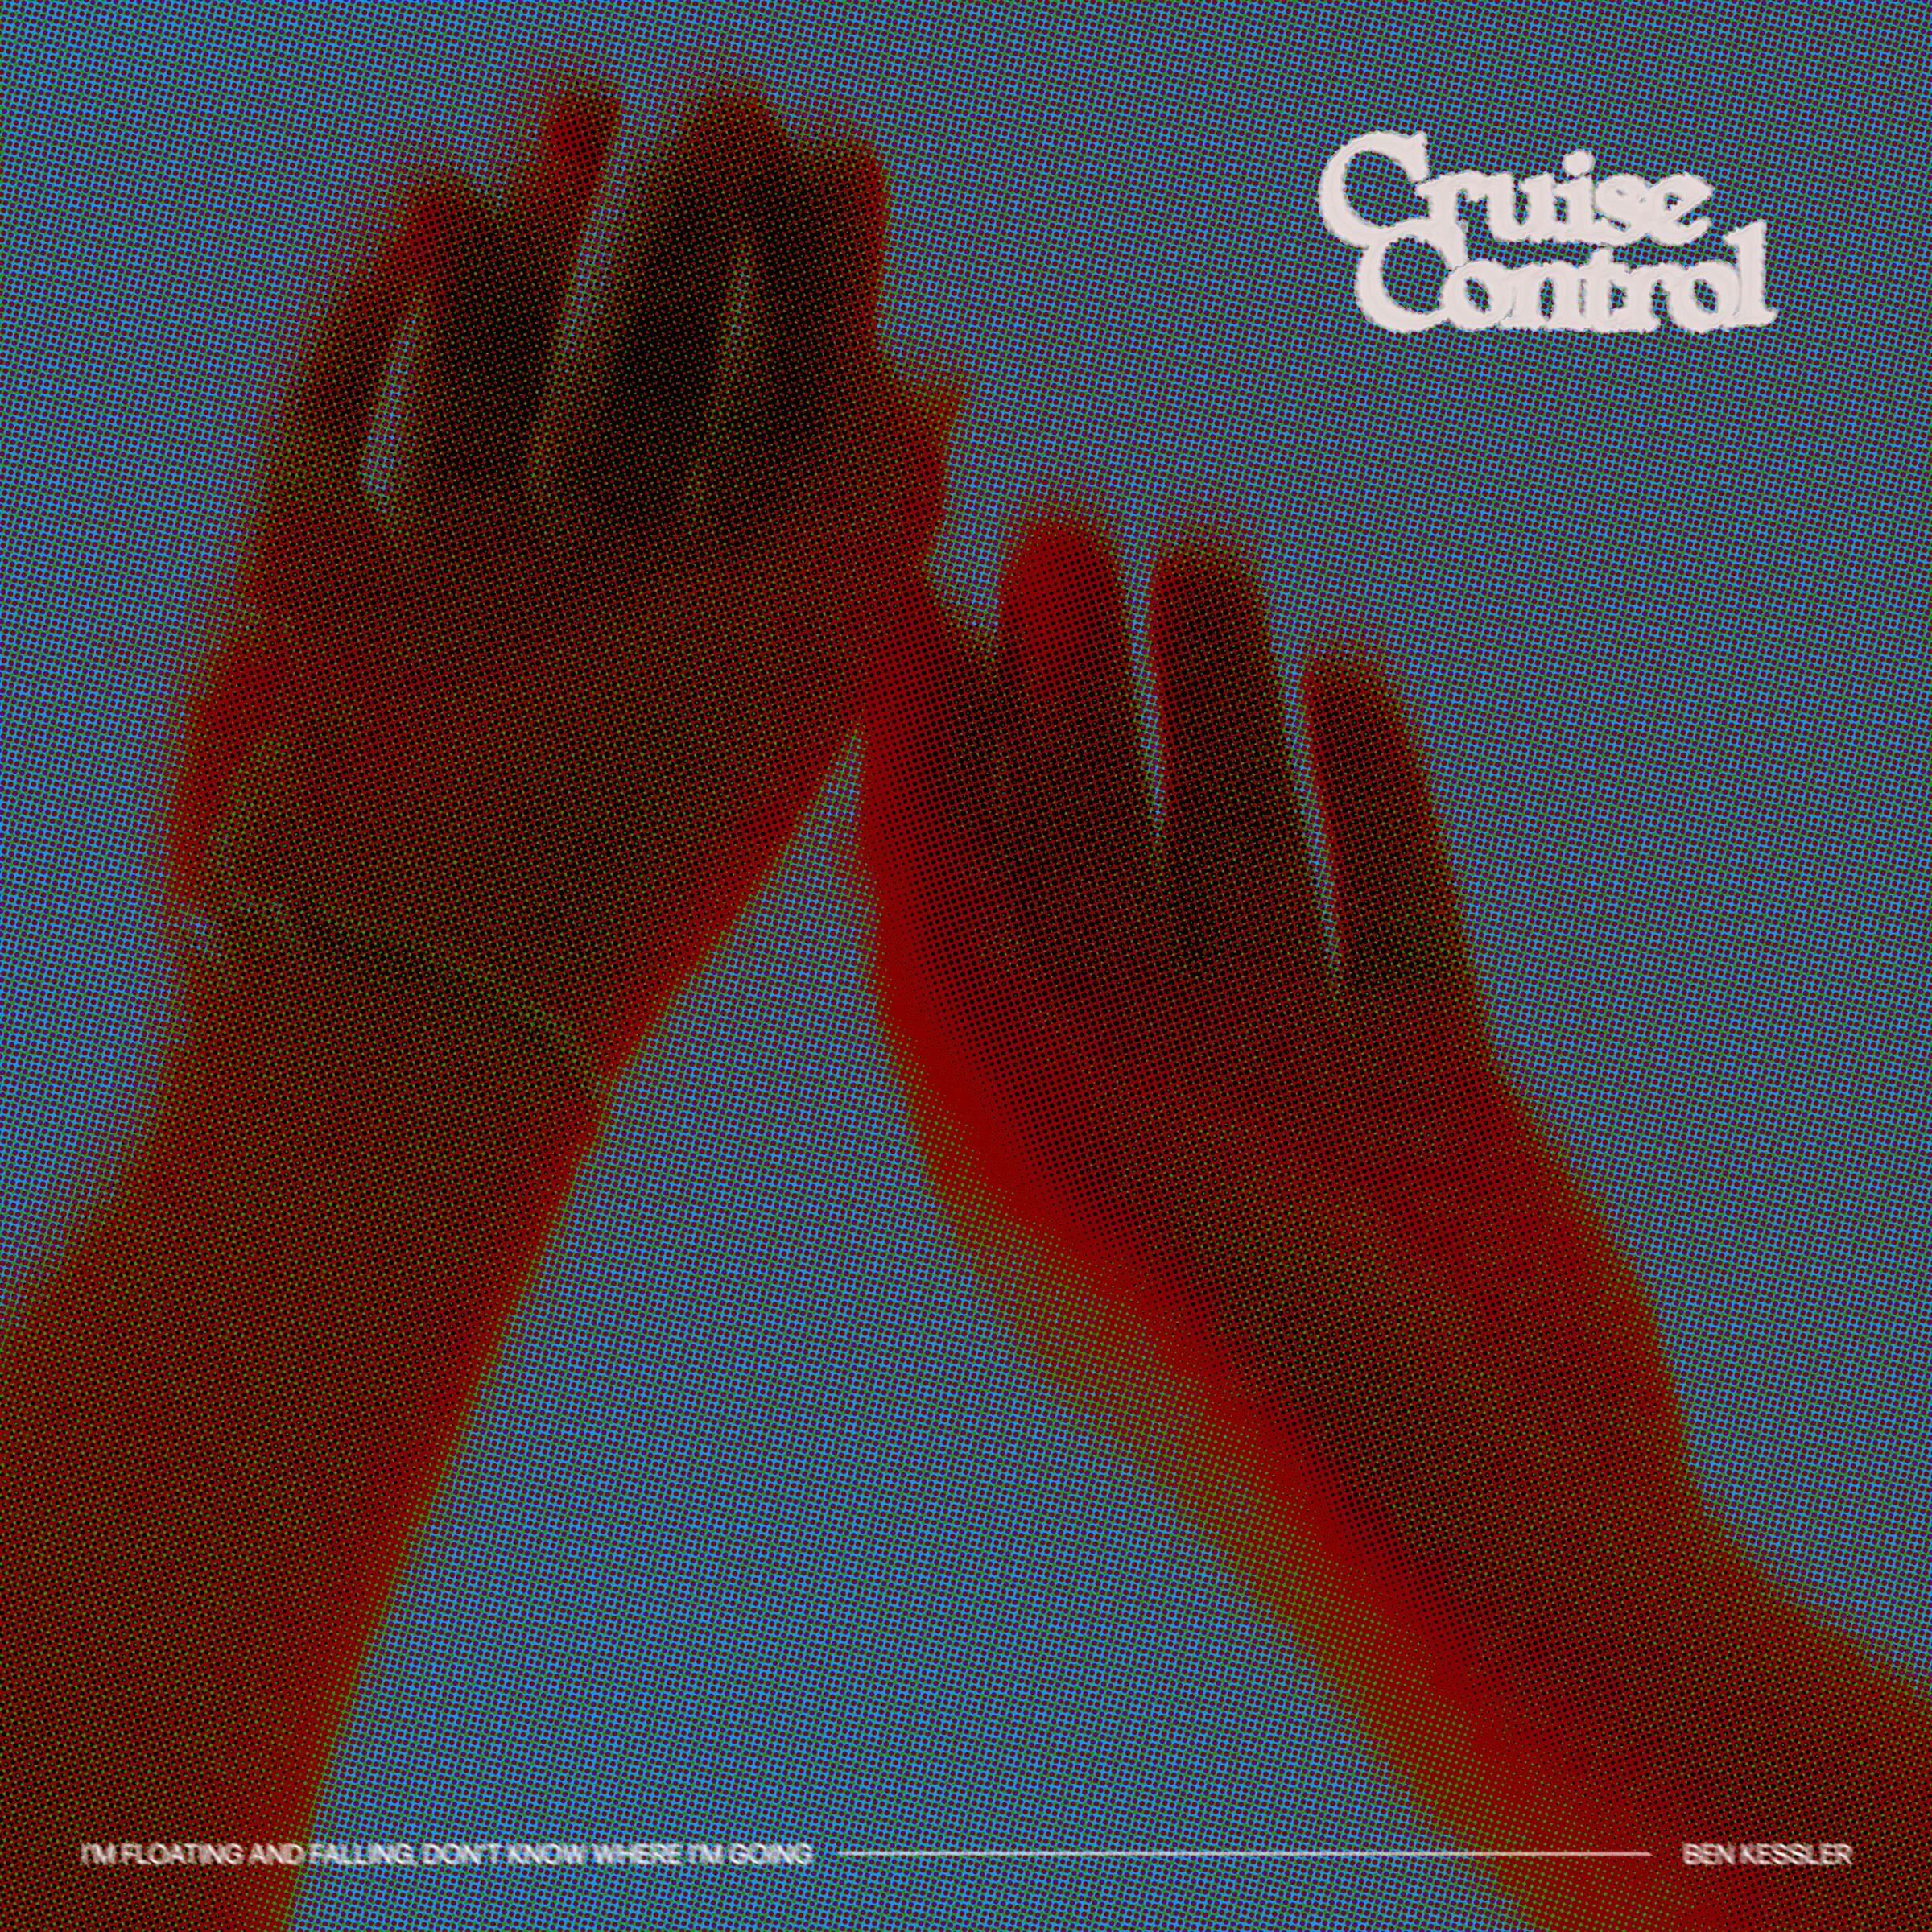 Cover art for cruise control by Ben Kessler